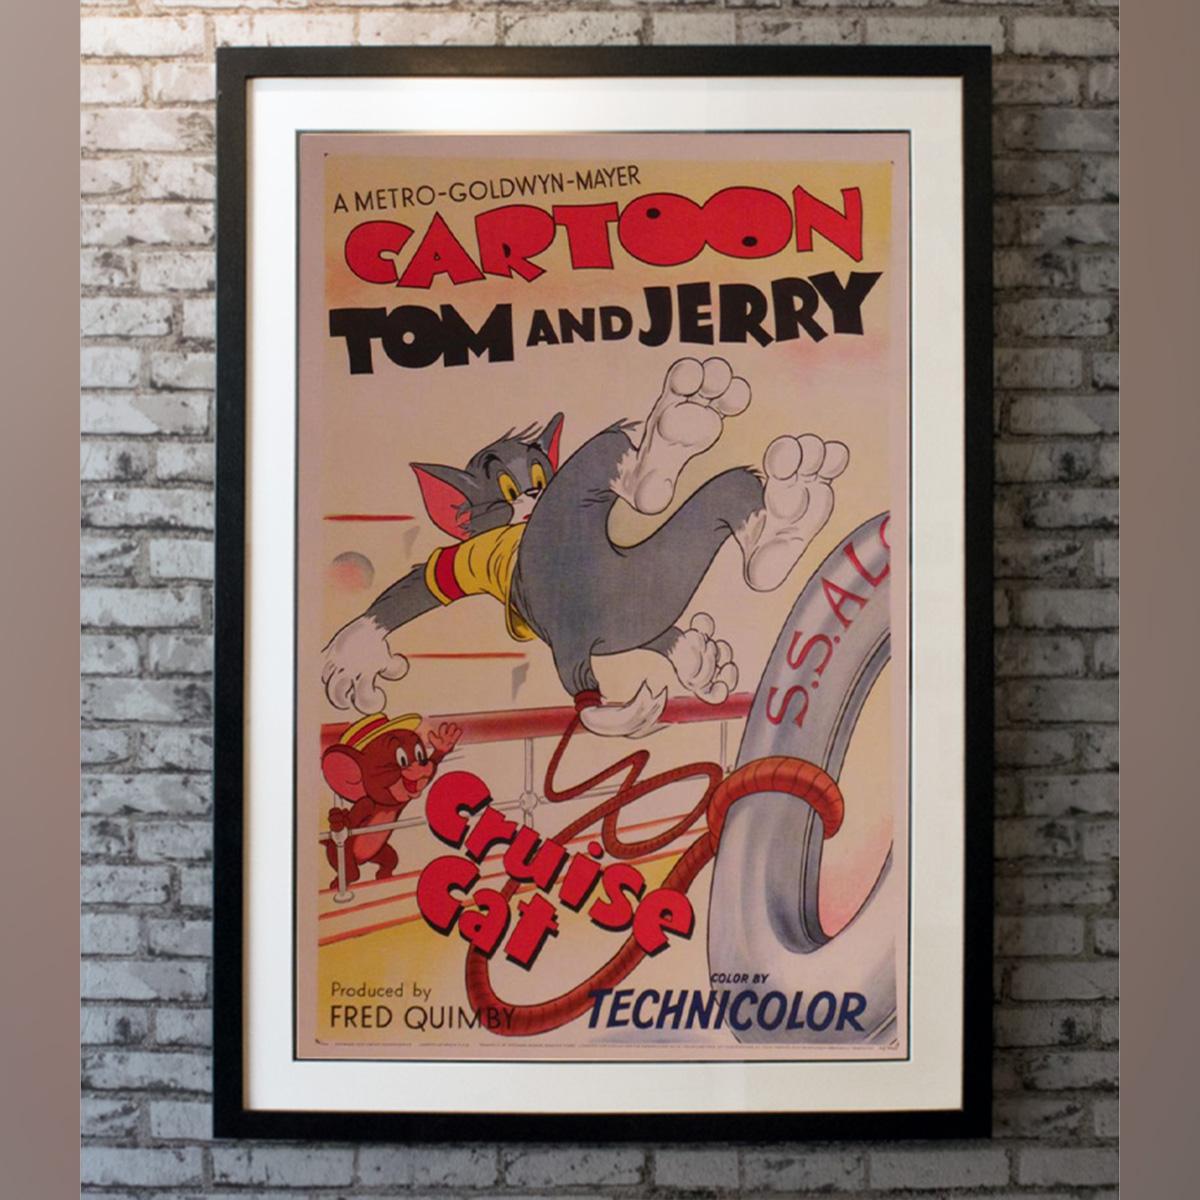 Full size posters for individual Tom & Jerry film titles are very rare as print runs for a three minute cartoon were small and distribution was limited. Rare first release poster from 1952 with artwork of Jerry pushing Tom overboard and waving bon